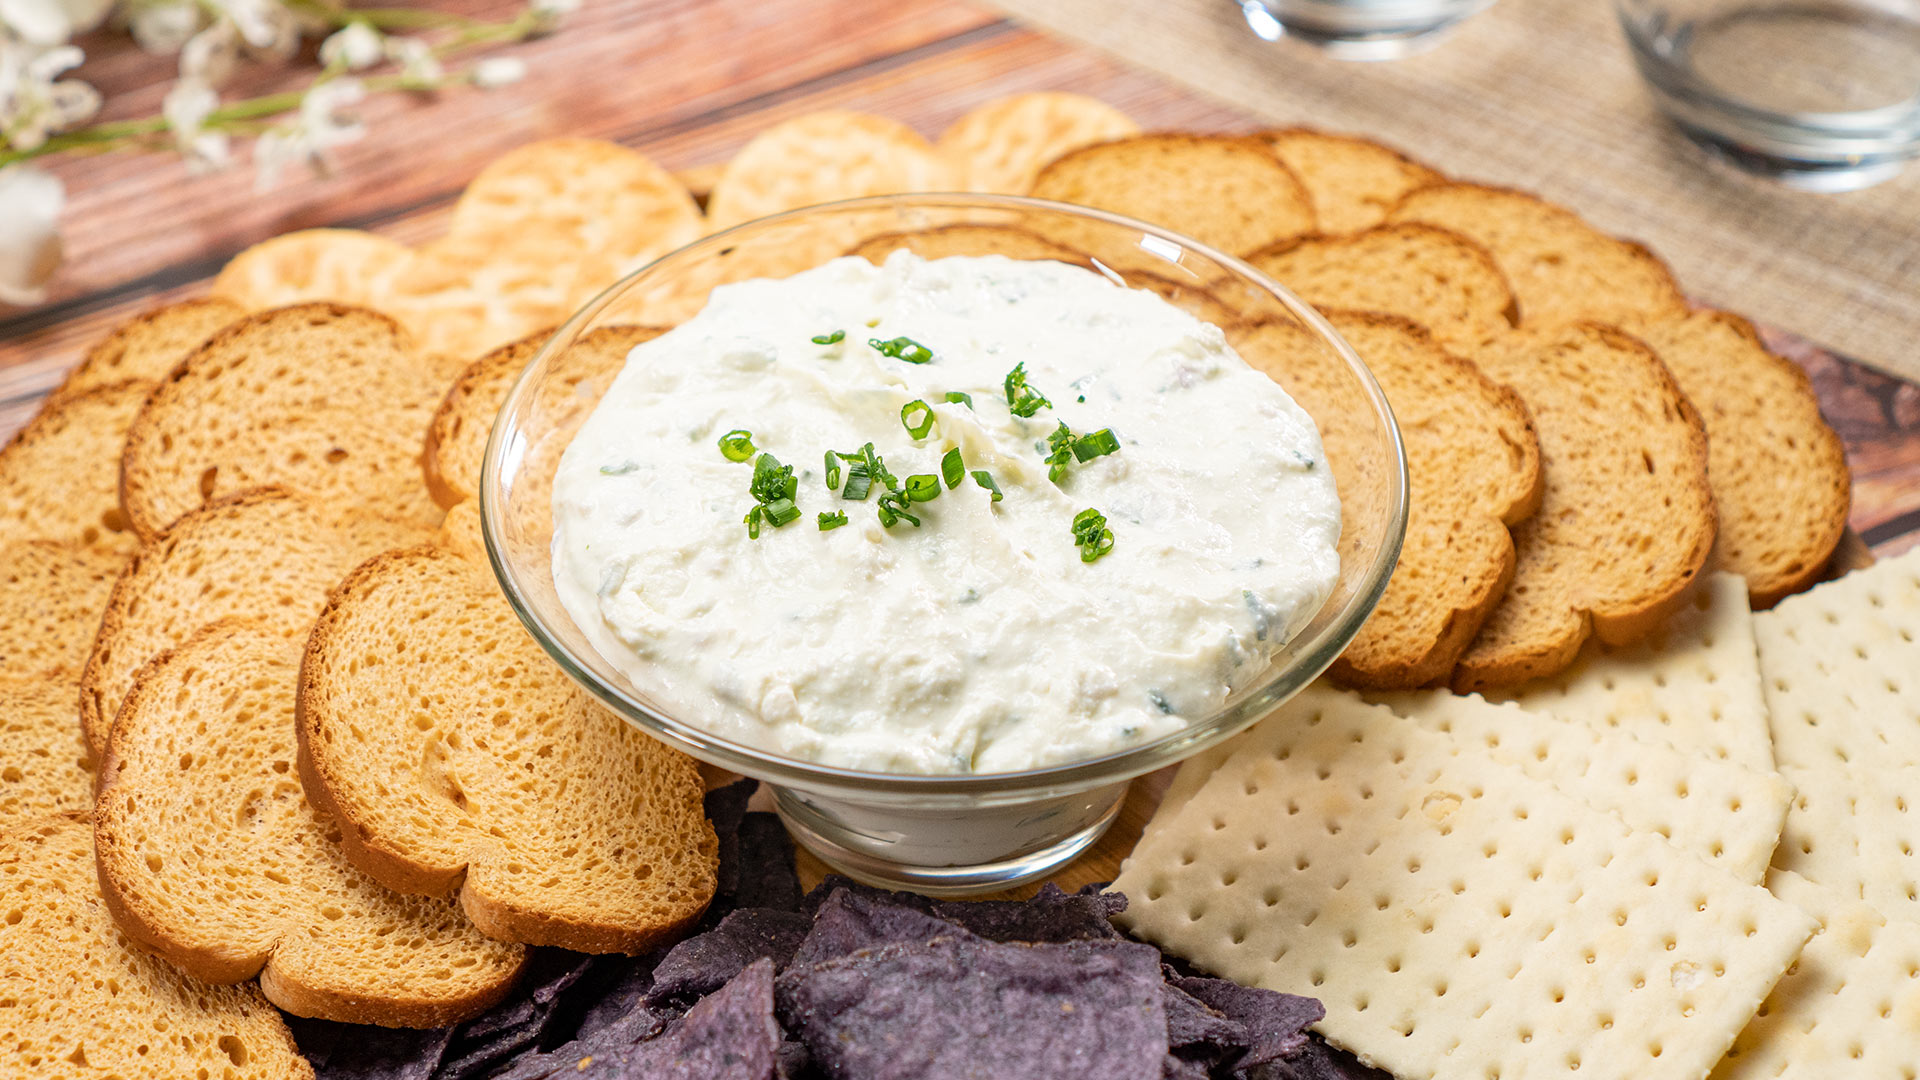 https://recipes.net/wp-content/uploads/2020/06/cottage-cheese-and-onion-dip-recipes.jpg